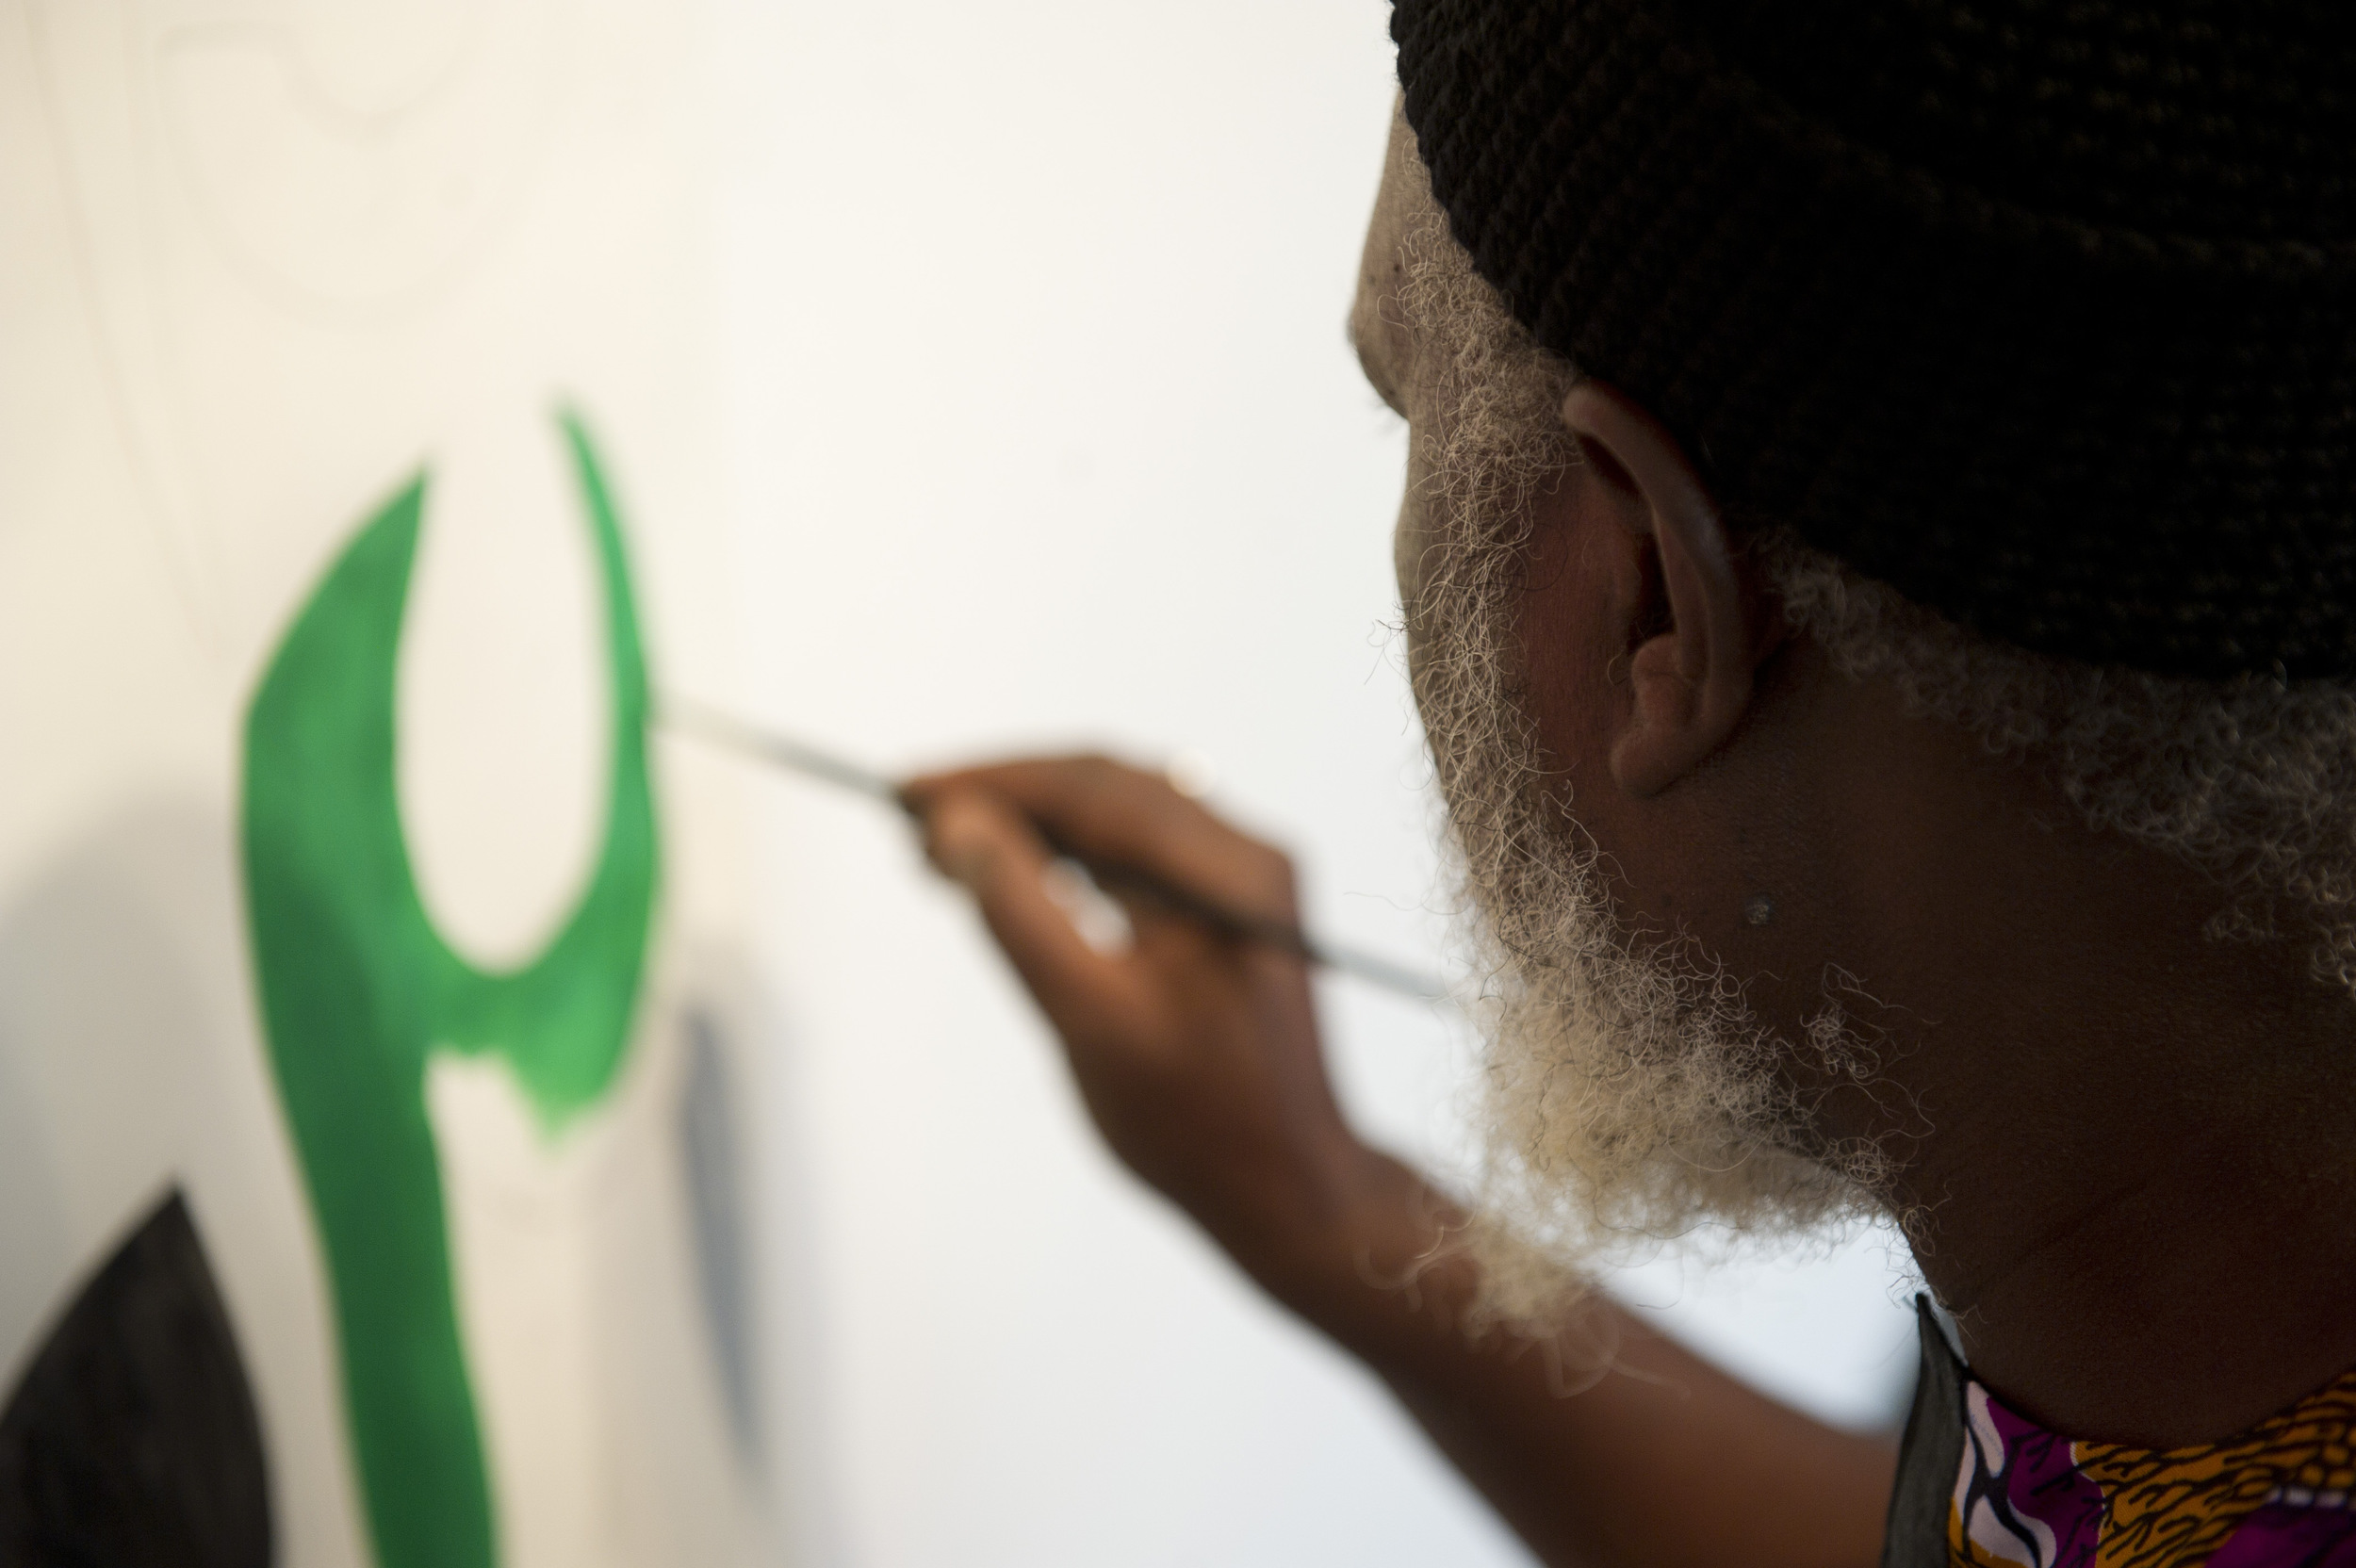  Artist Yelimane Fall of Senegal works on the beginnings of a mural while the rest of his work is installed for an exhibit in the GSU Gallery, November 9, 2011.&nbsp;Photo by Cydney Scott for Boston University Photography 